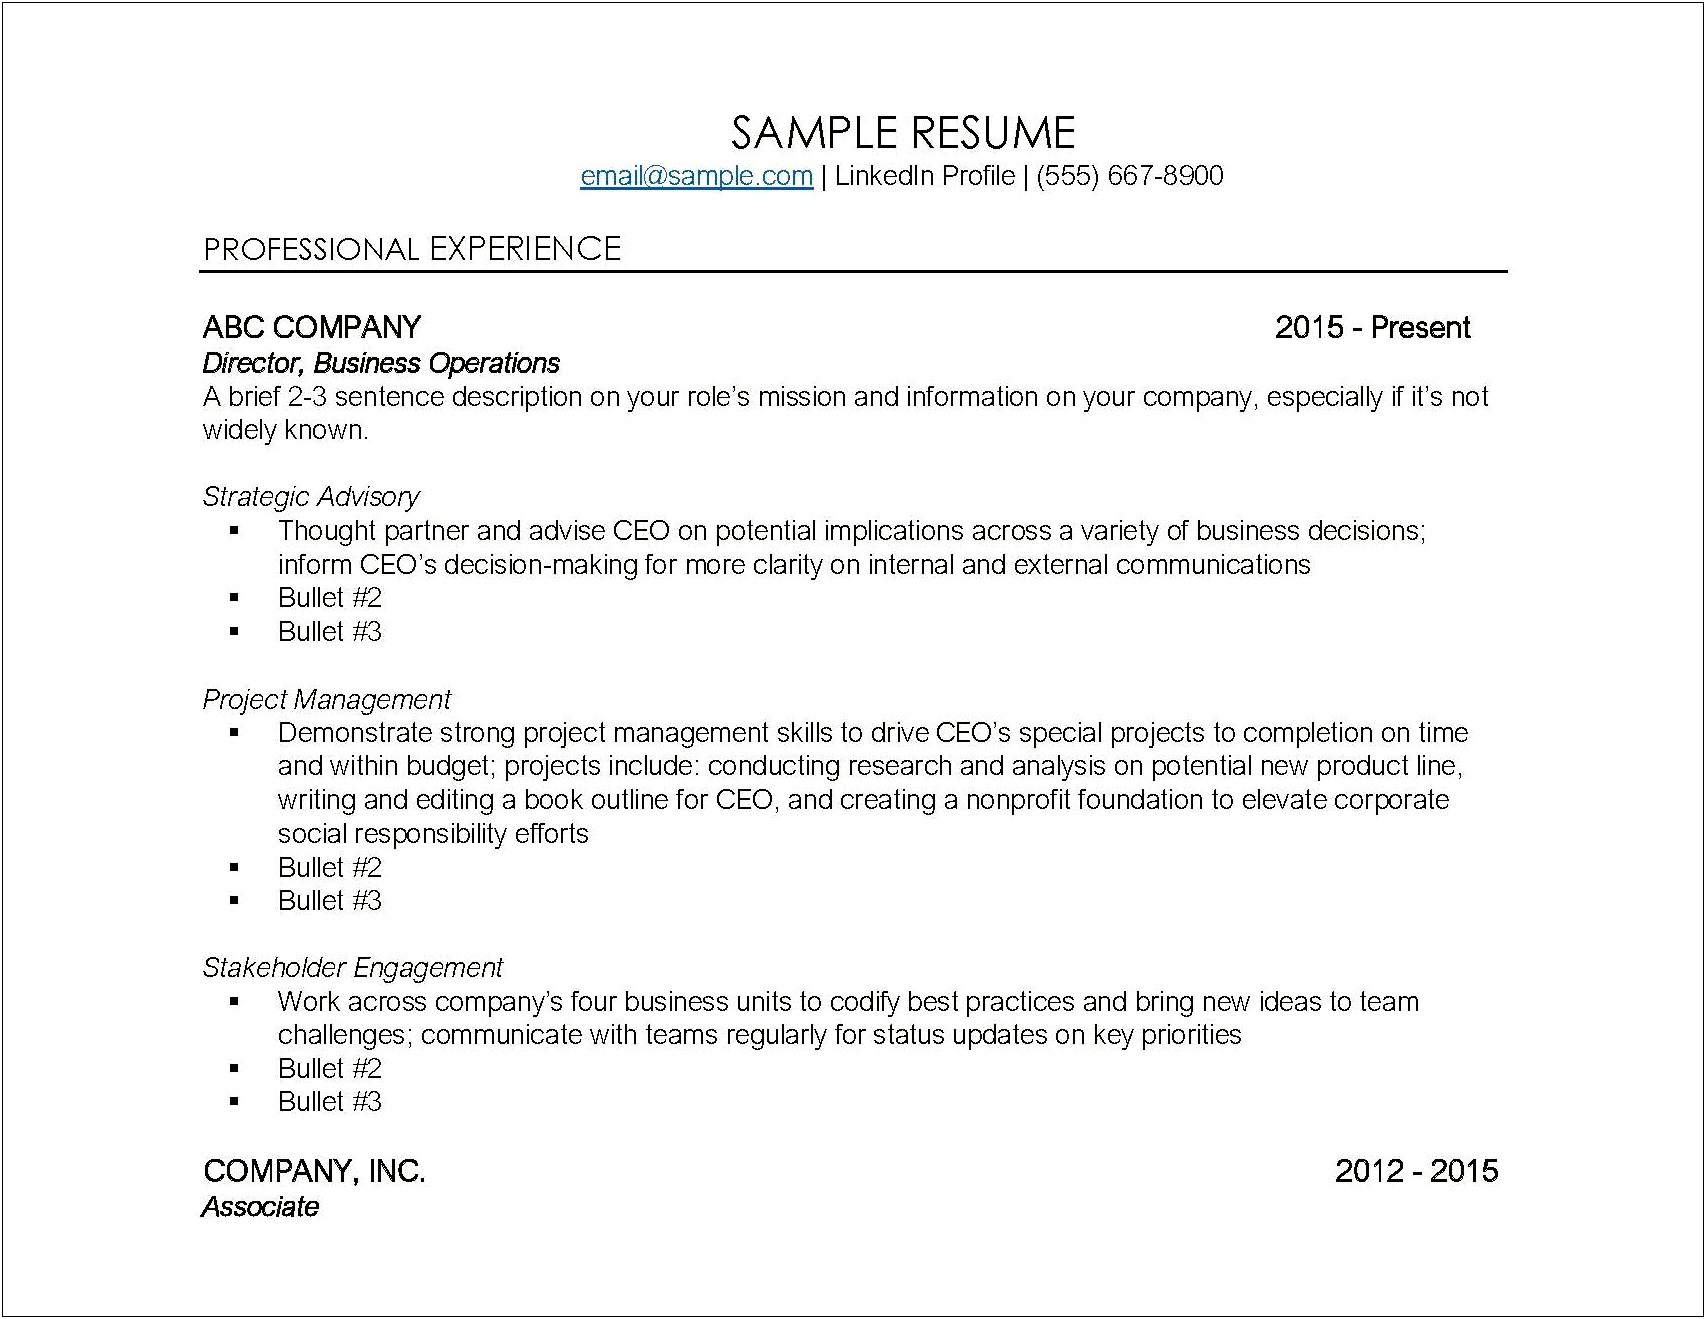 Resume Samples Work Experience Section